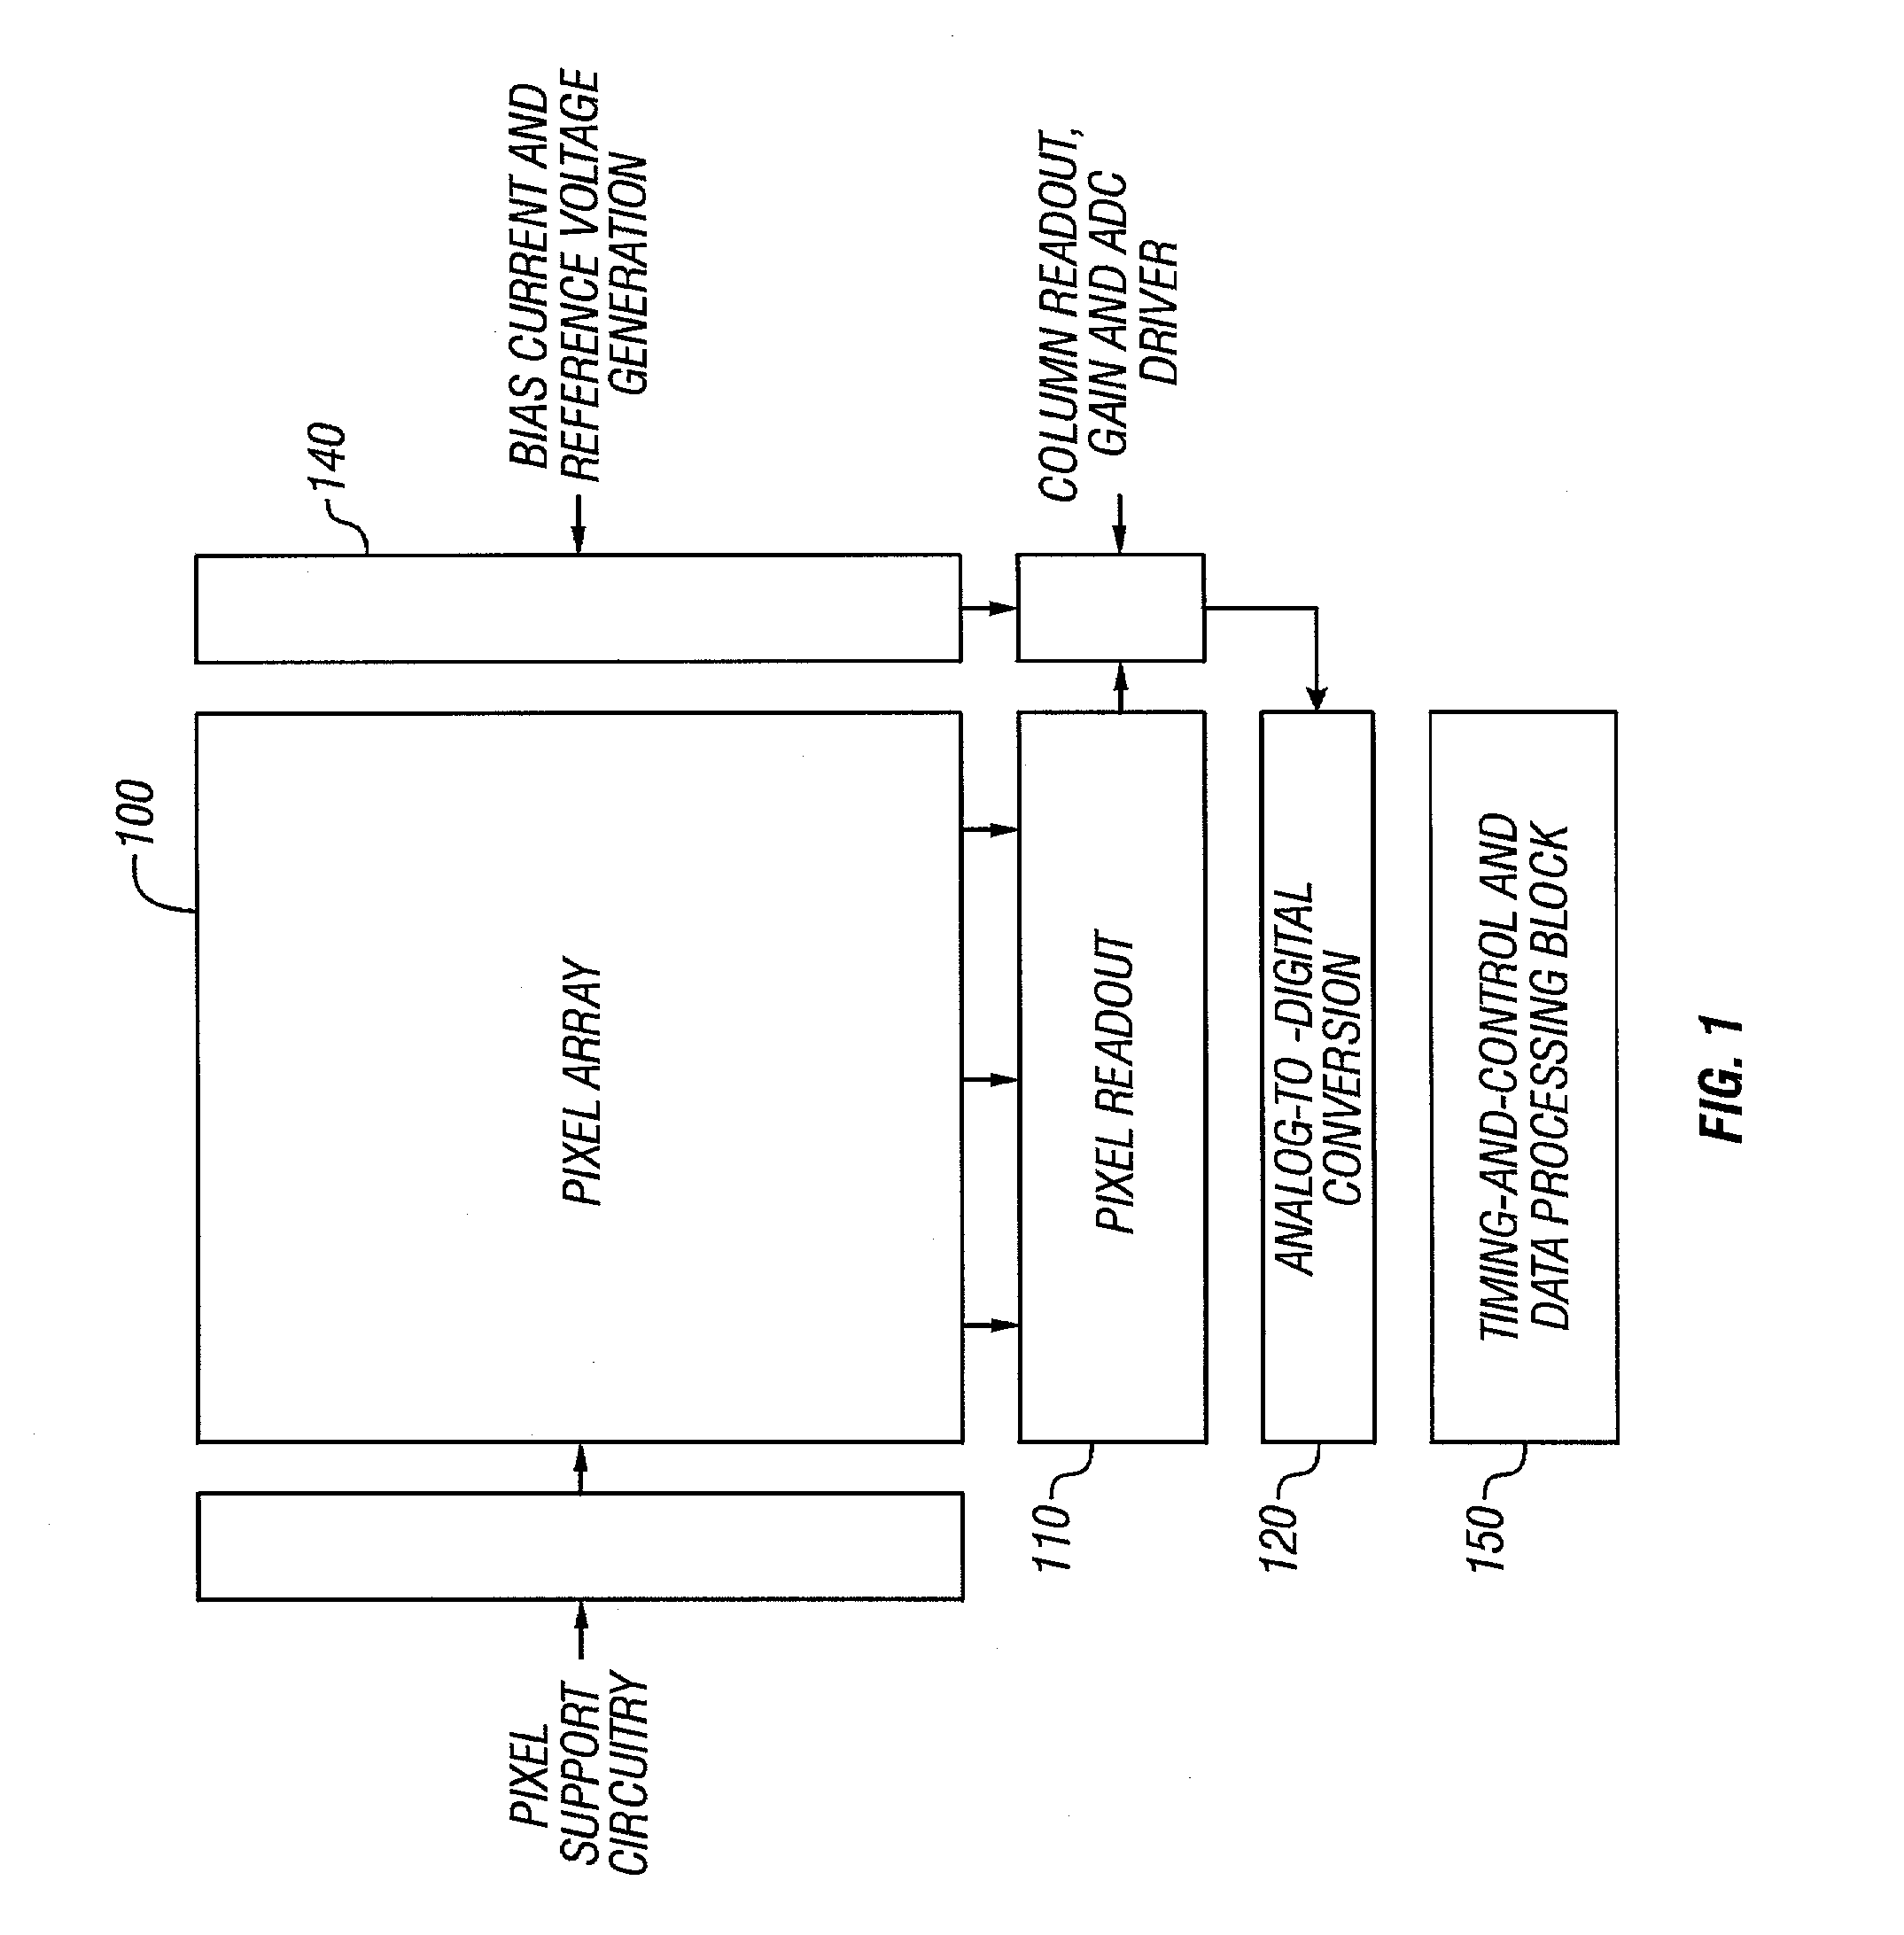 CMOS image sensor with a low-power architecture